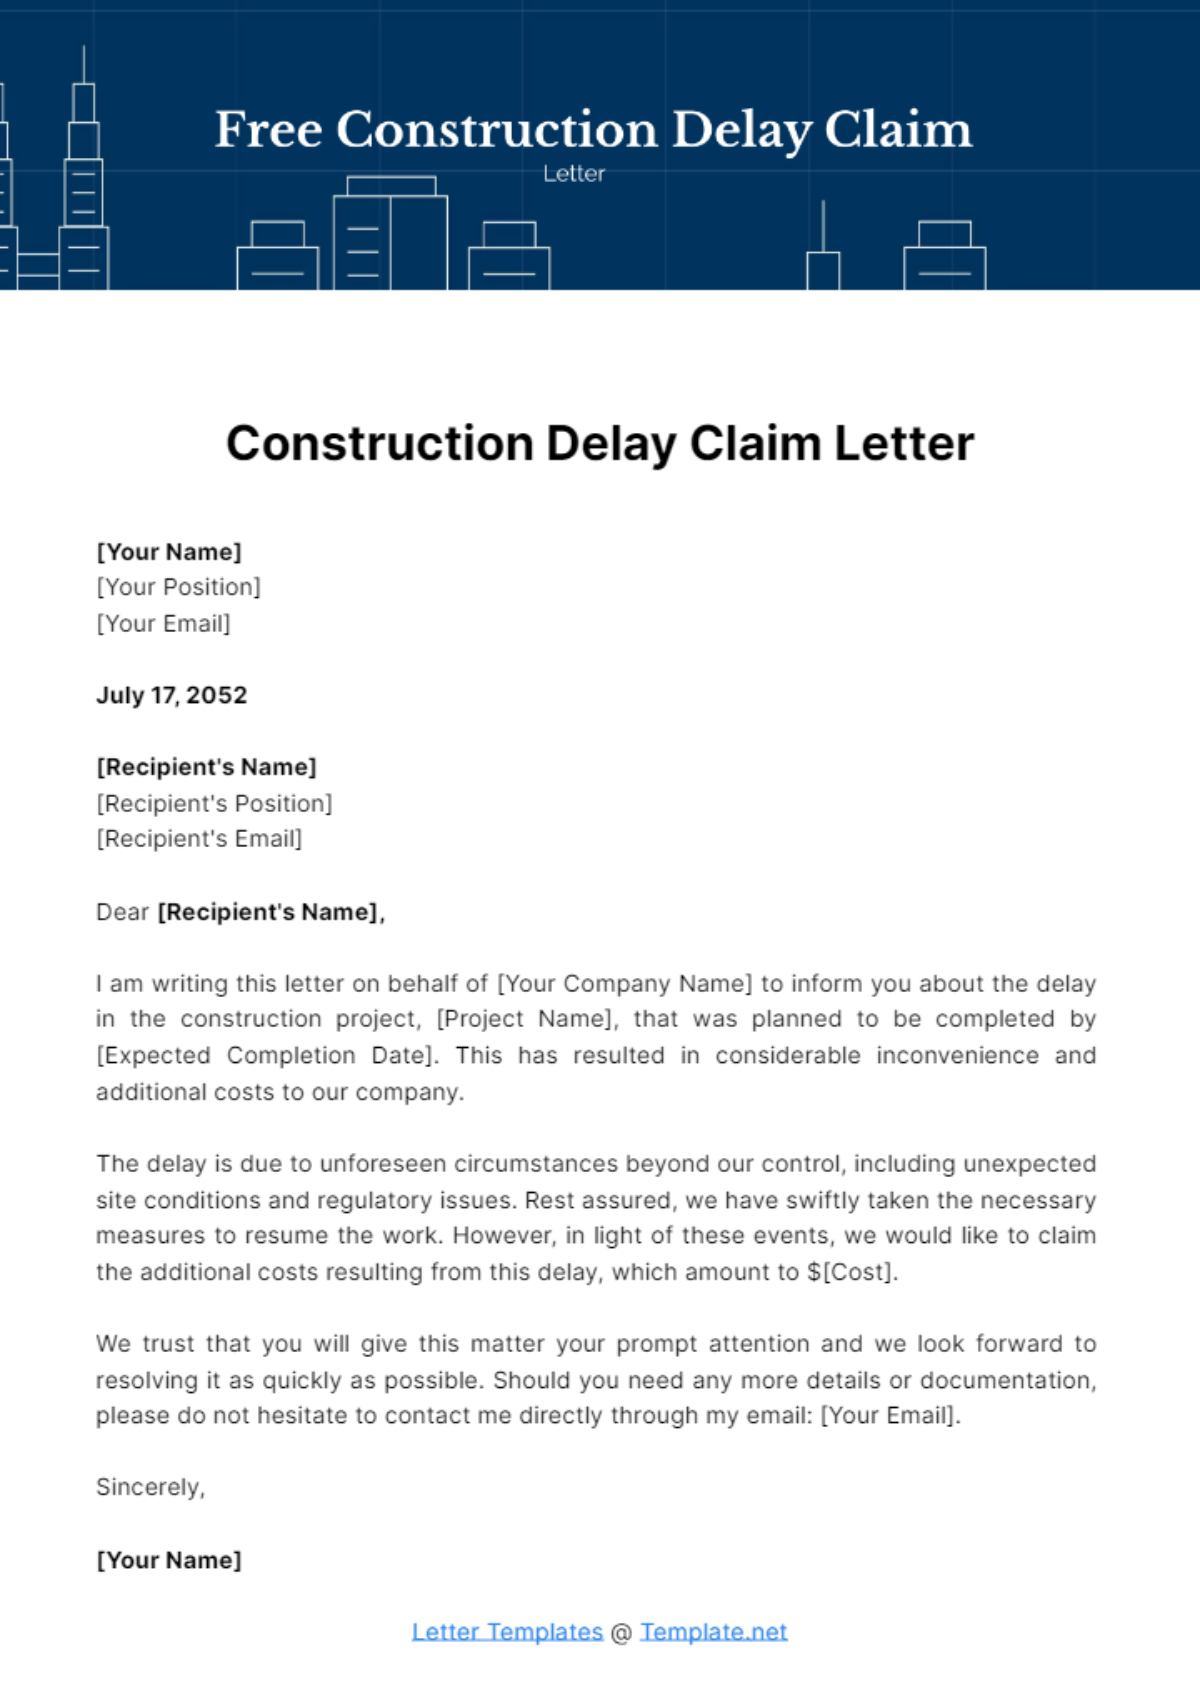 Construction Delay Claim Letter Template